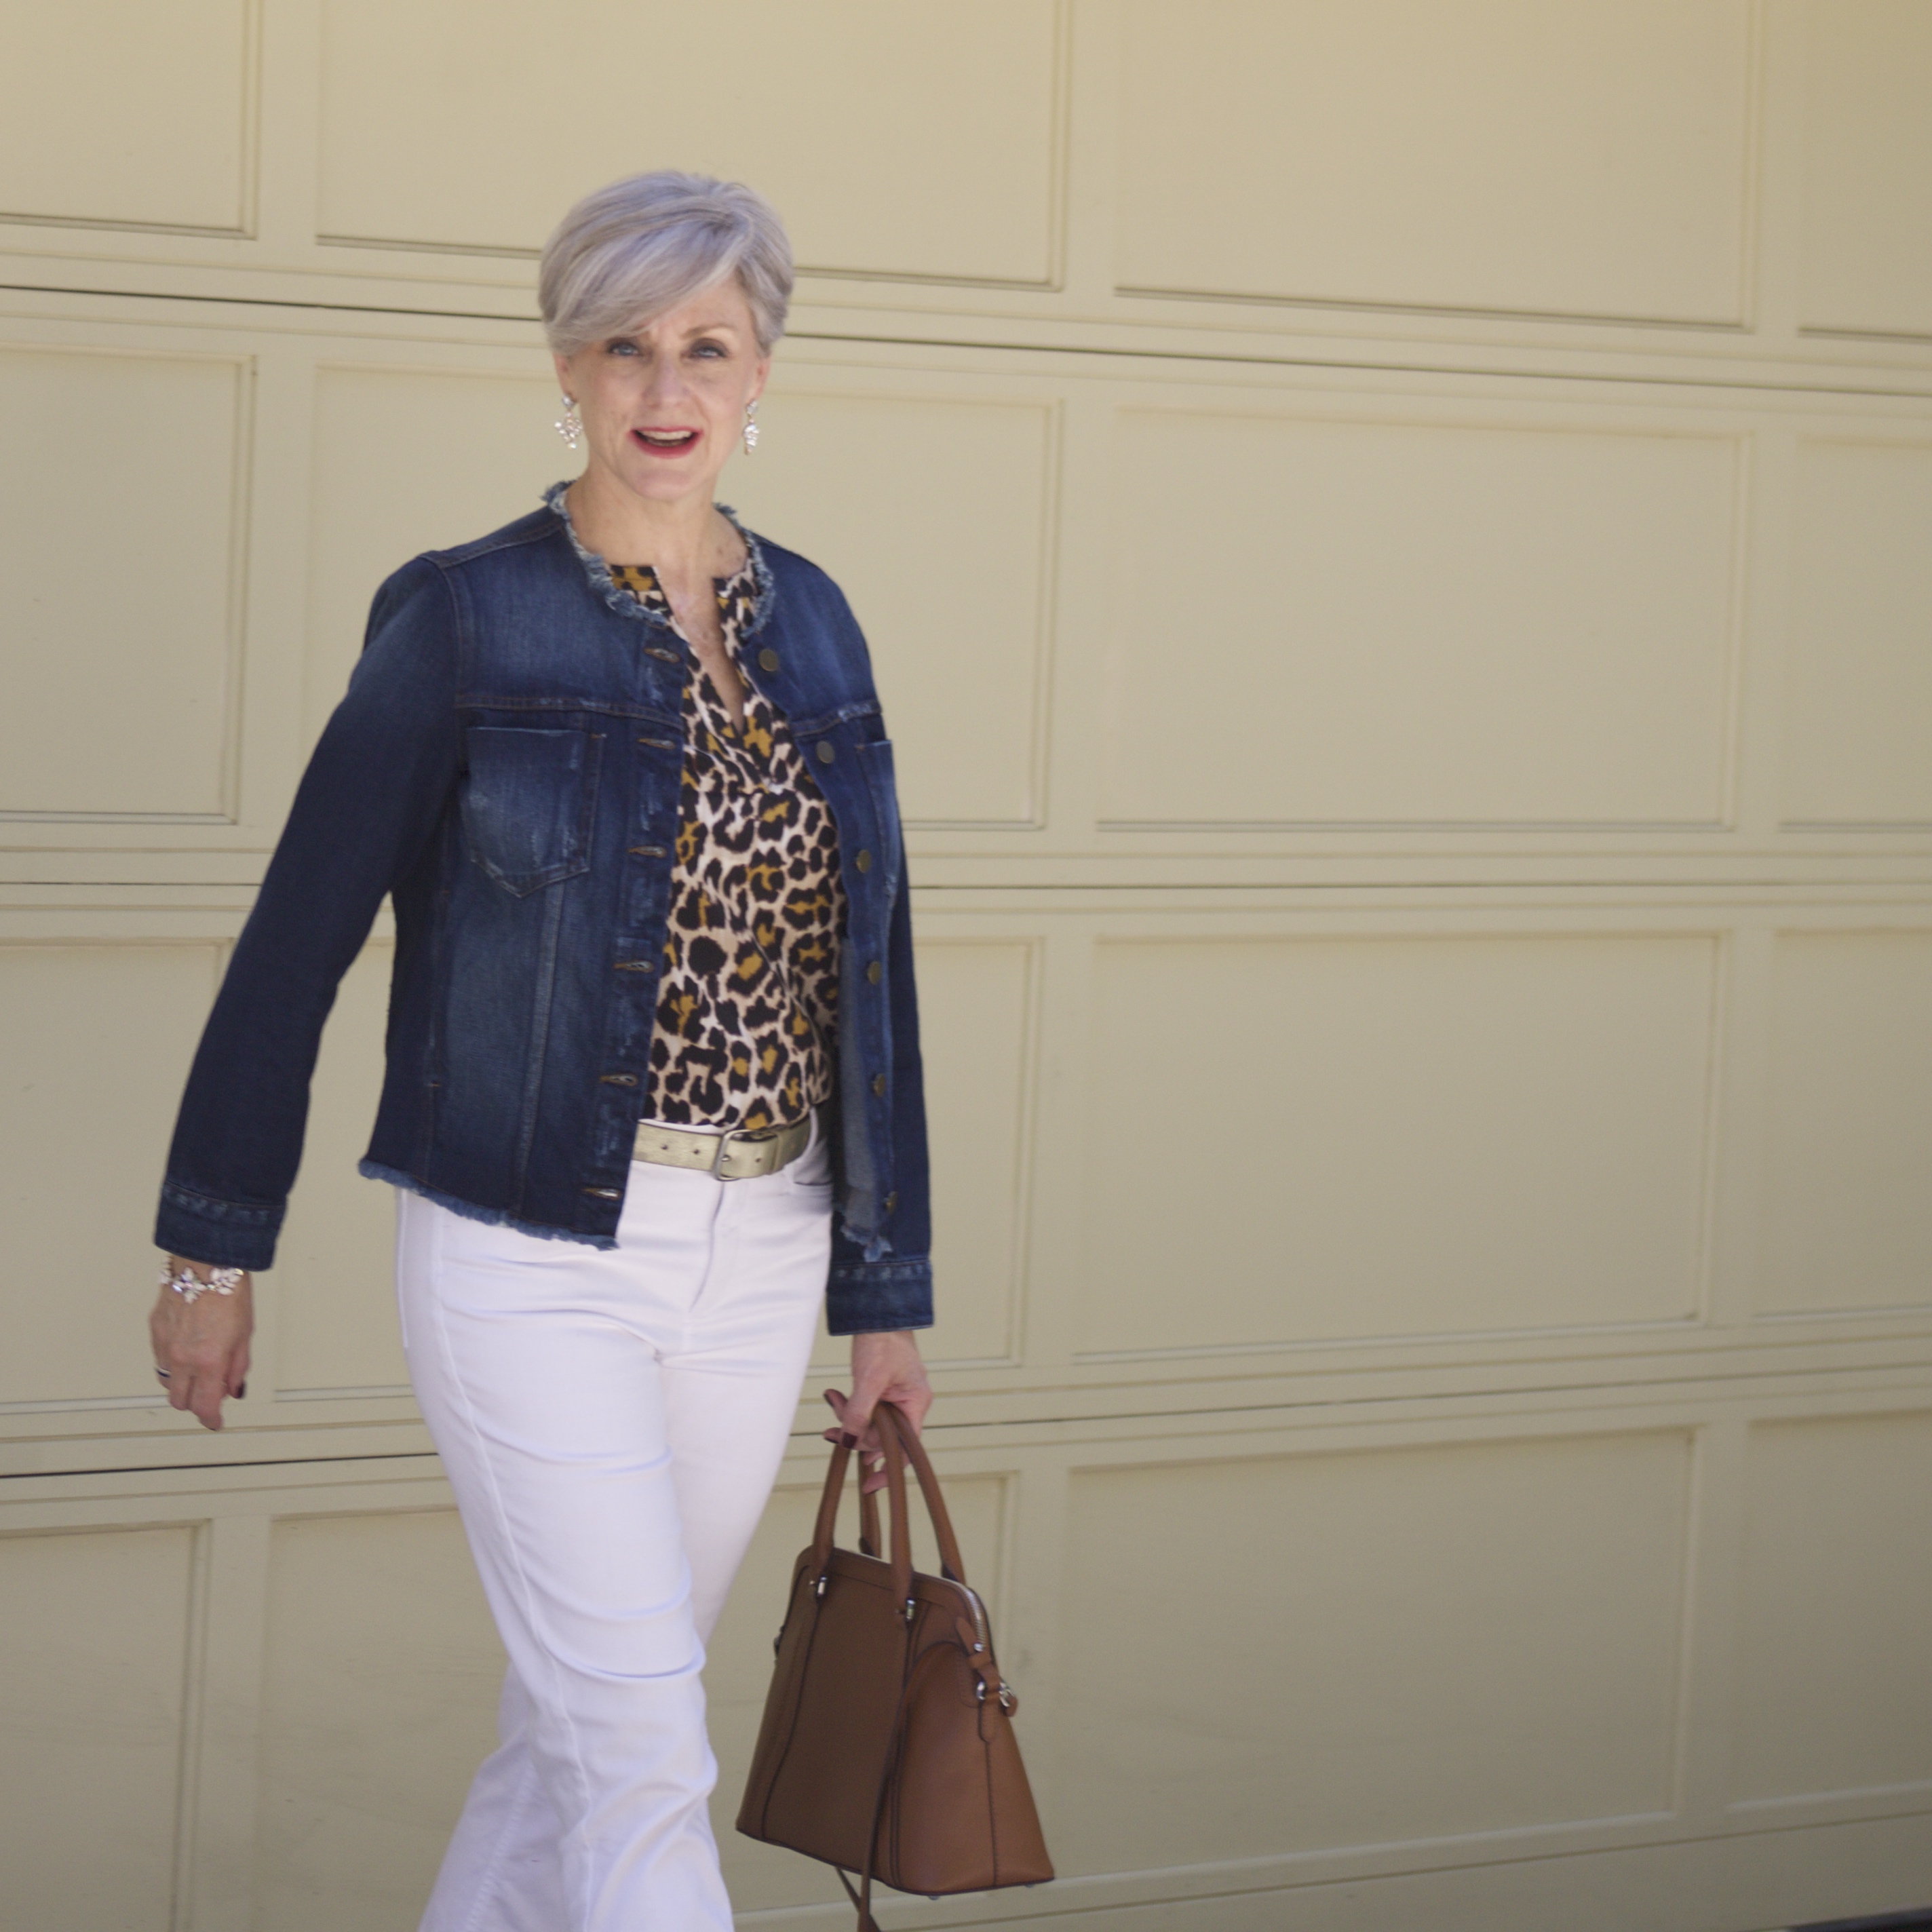 fringed | Style at a Certain Age